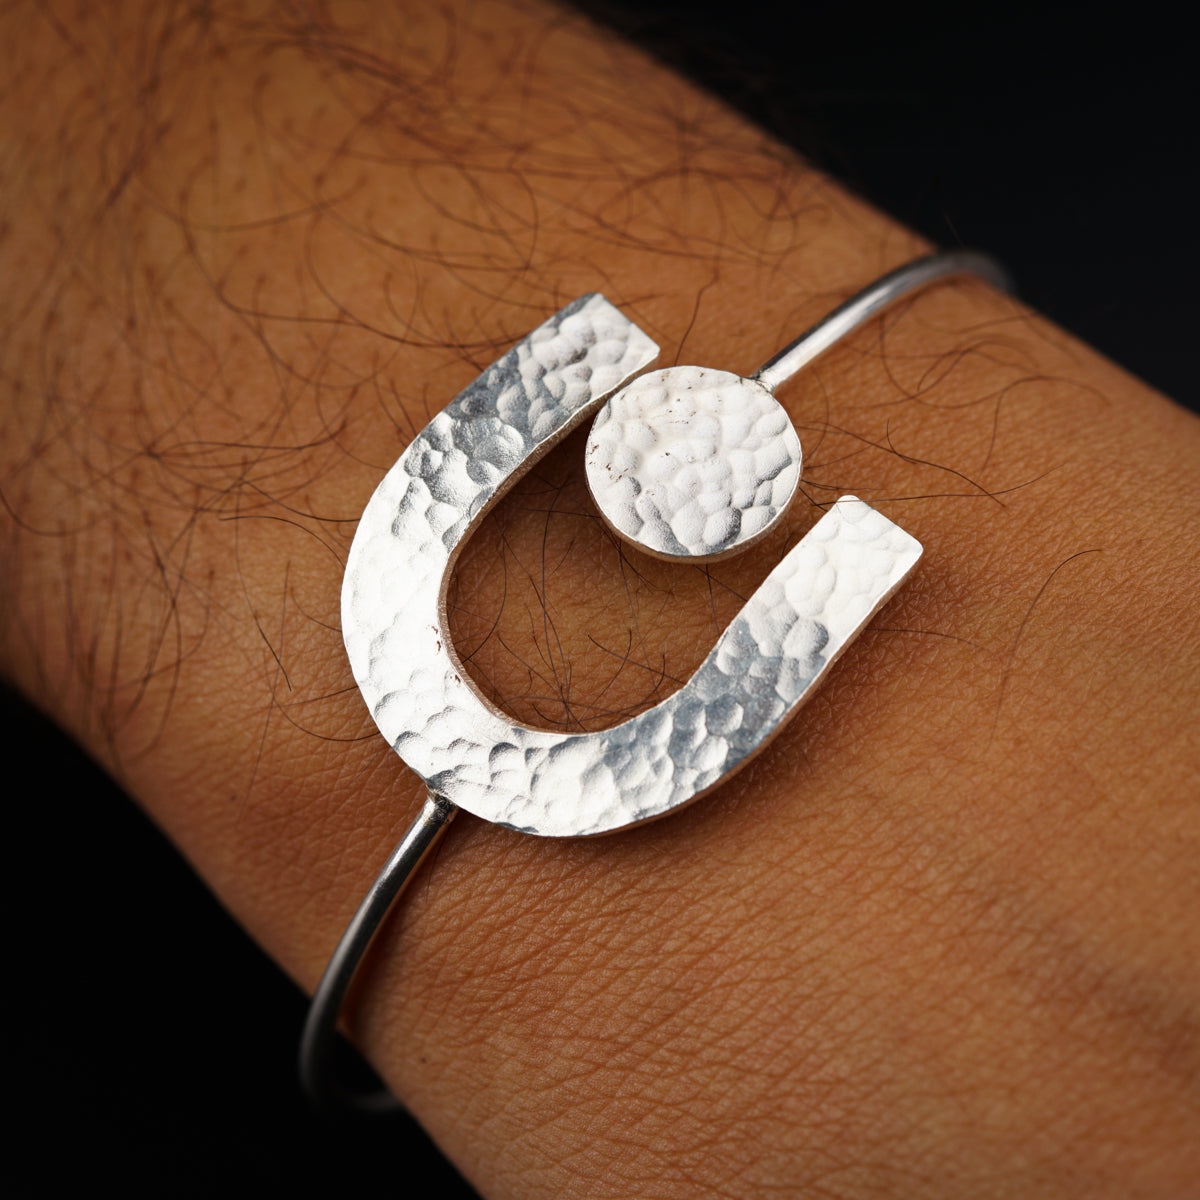 a close up of a person's arm wearing a silver bracelet